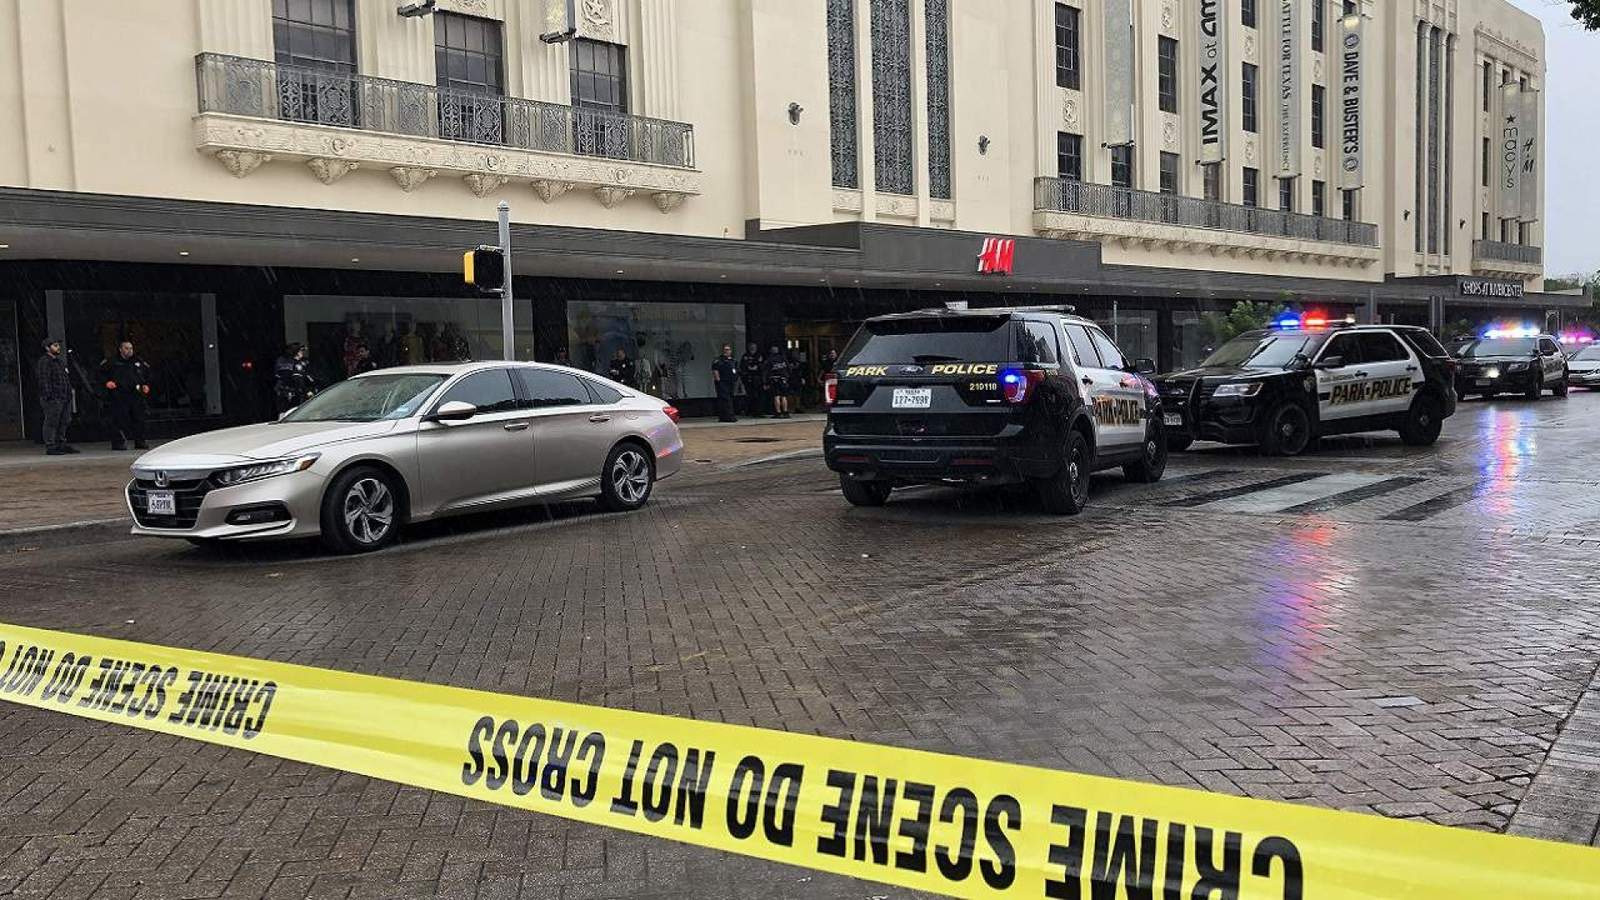 Driver shoots panhandler in Alamo Plaza, police say